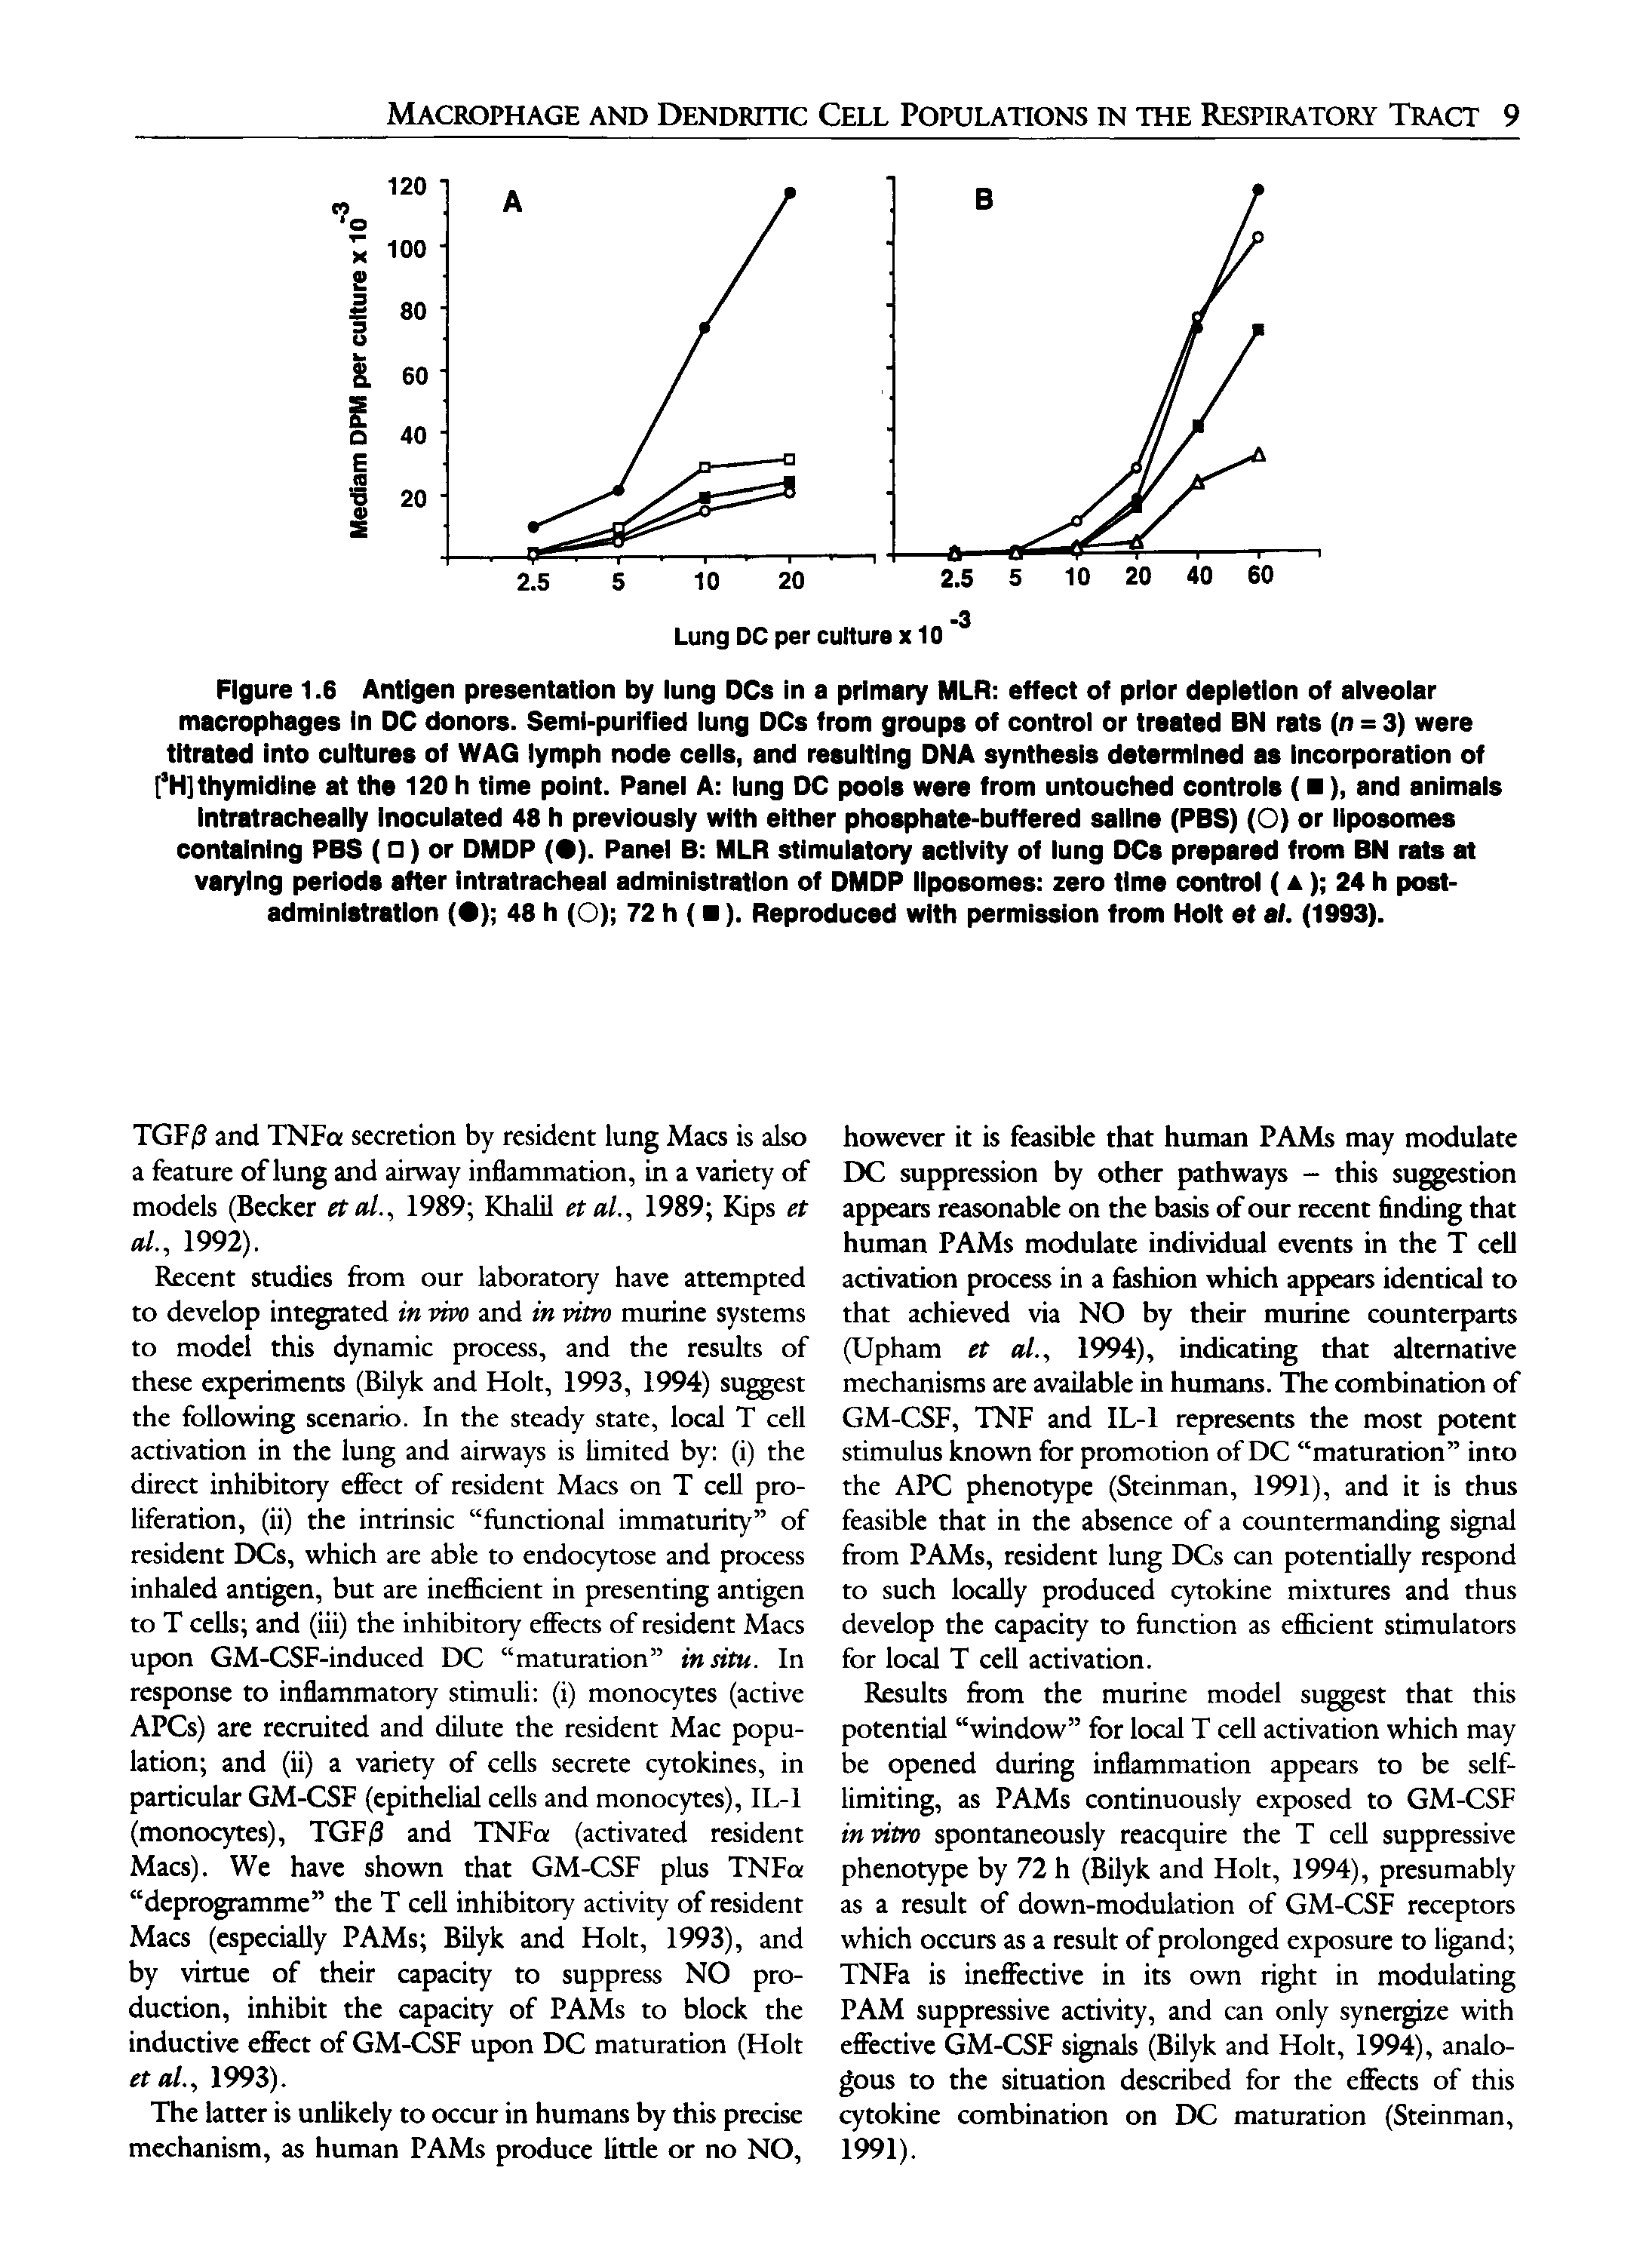 Figure 1.6 Antigen presentation by lung DCs in a primary MLR effect of prior depletion of alveolar macrophages in DC donors. Semi-purified lung DCs from groups of control or treated BN rats (n = 3) were titrated into cultures of WAG lymph node cells, and resulting DNA synthesis determined as Incorporation of [ H] thymidine at the 120 h time point. Panel A lung DC pools were from untouched controls ( ), and animals Intratracheally inoculated 48 h previously with either phosphate-buffered saline (PBS) (O) or liposomes containing PBS ( ) or DMDP ( ). Panel B MLR stimulatory activity of lung DCs prepared from BN rats at varying periods after intratracheal administration of DMDP liposomes zero time control ( a ) 24 h post-administration ( ) 48 h (O) 72 h ( ). Reproduced with permission from Holt et af. (1993).